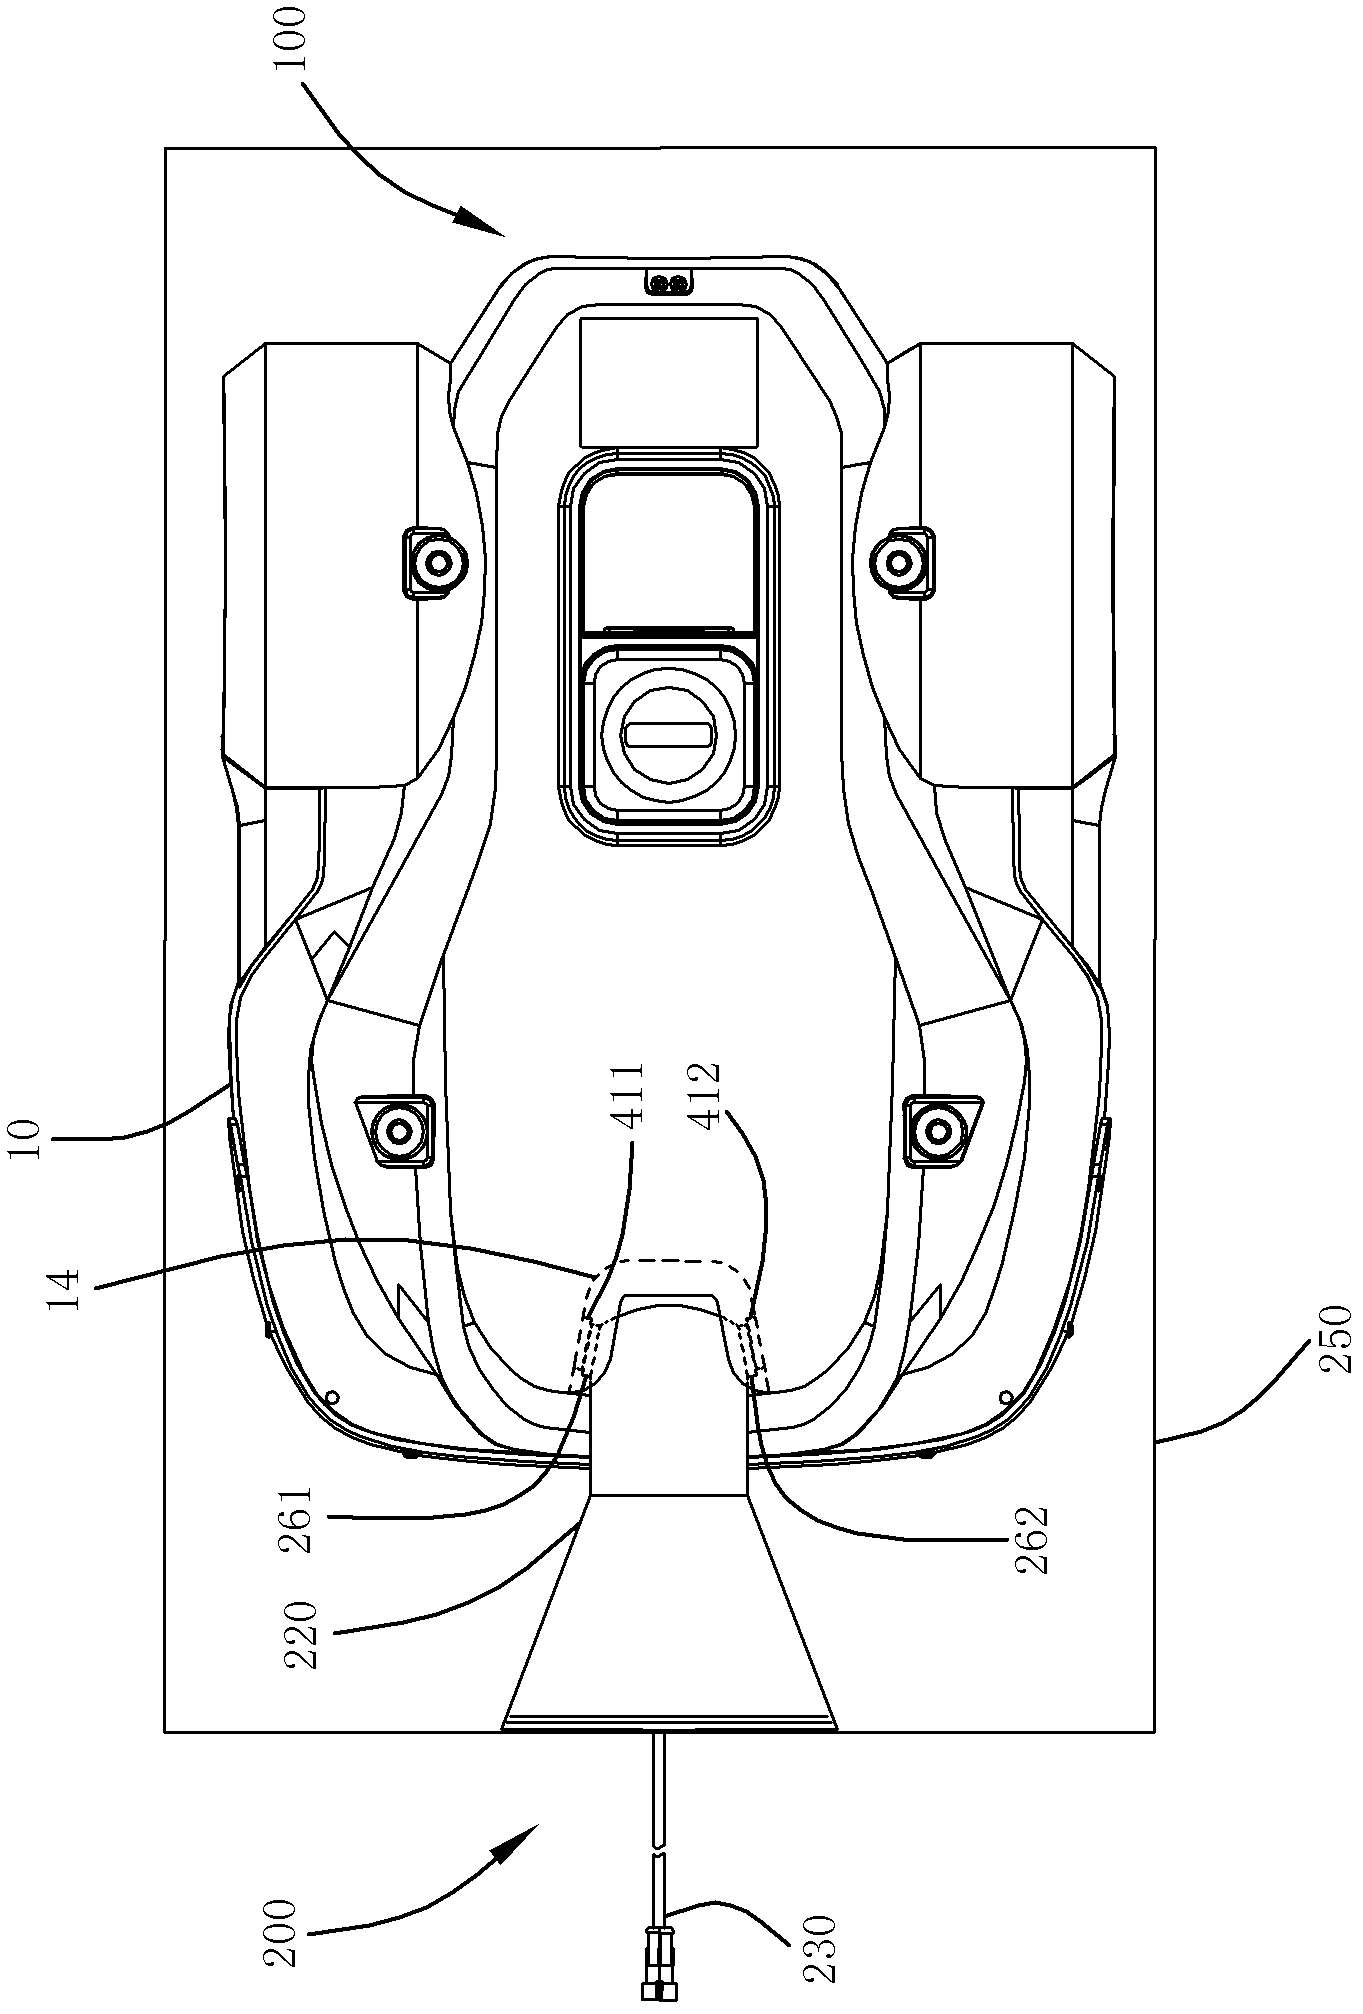 Mower and butt-joint charging system